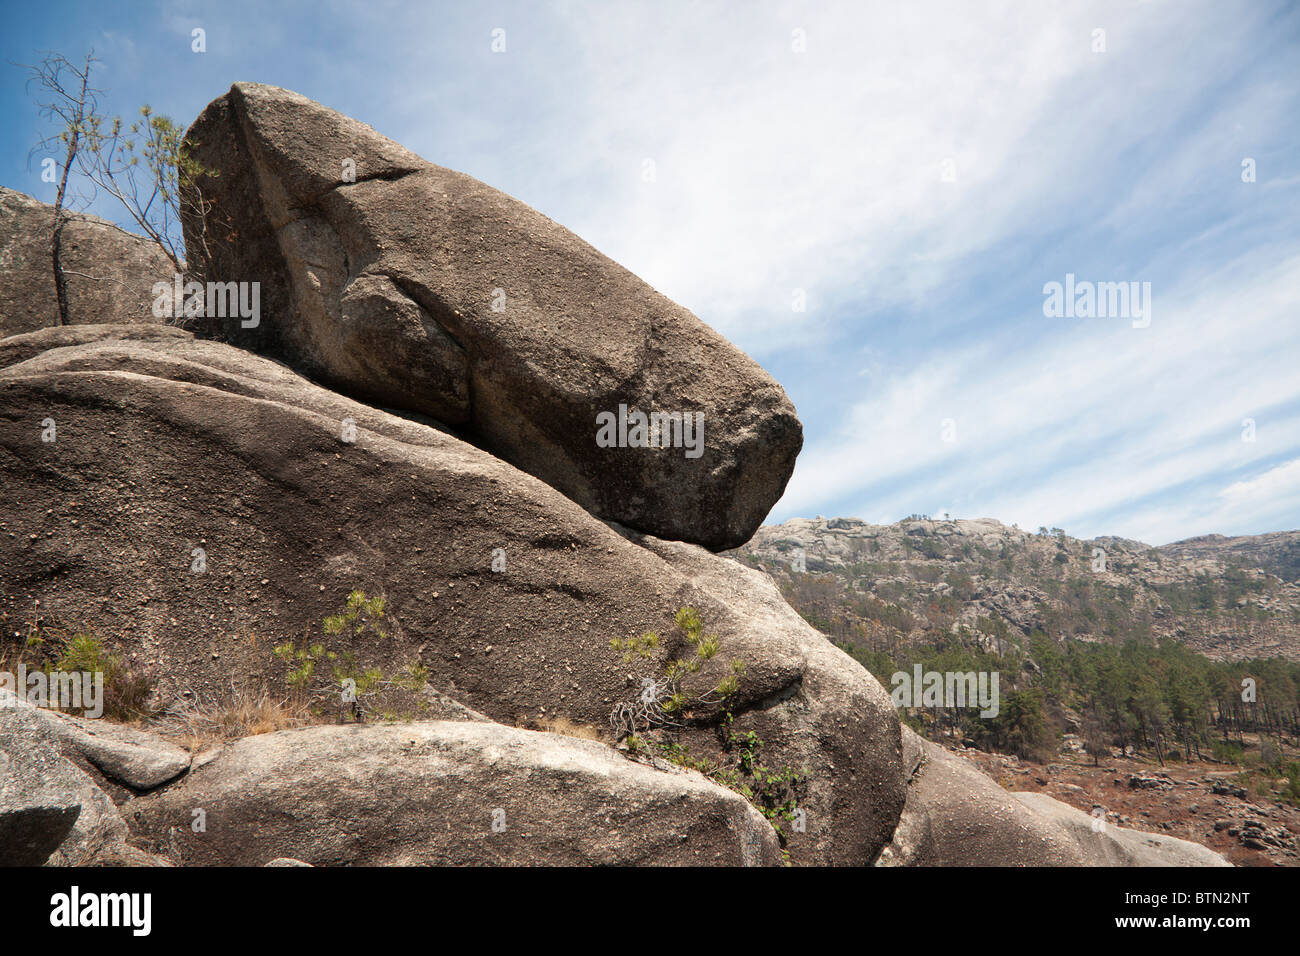 Rock on Serra do Gerês in Portugal that looks like a battle droid from Star Wars movies. Stock Photo